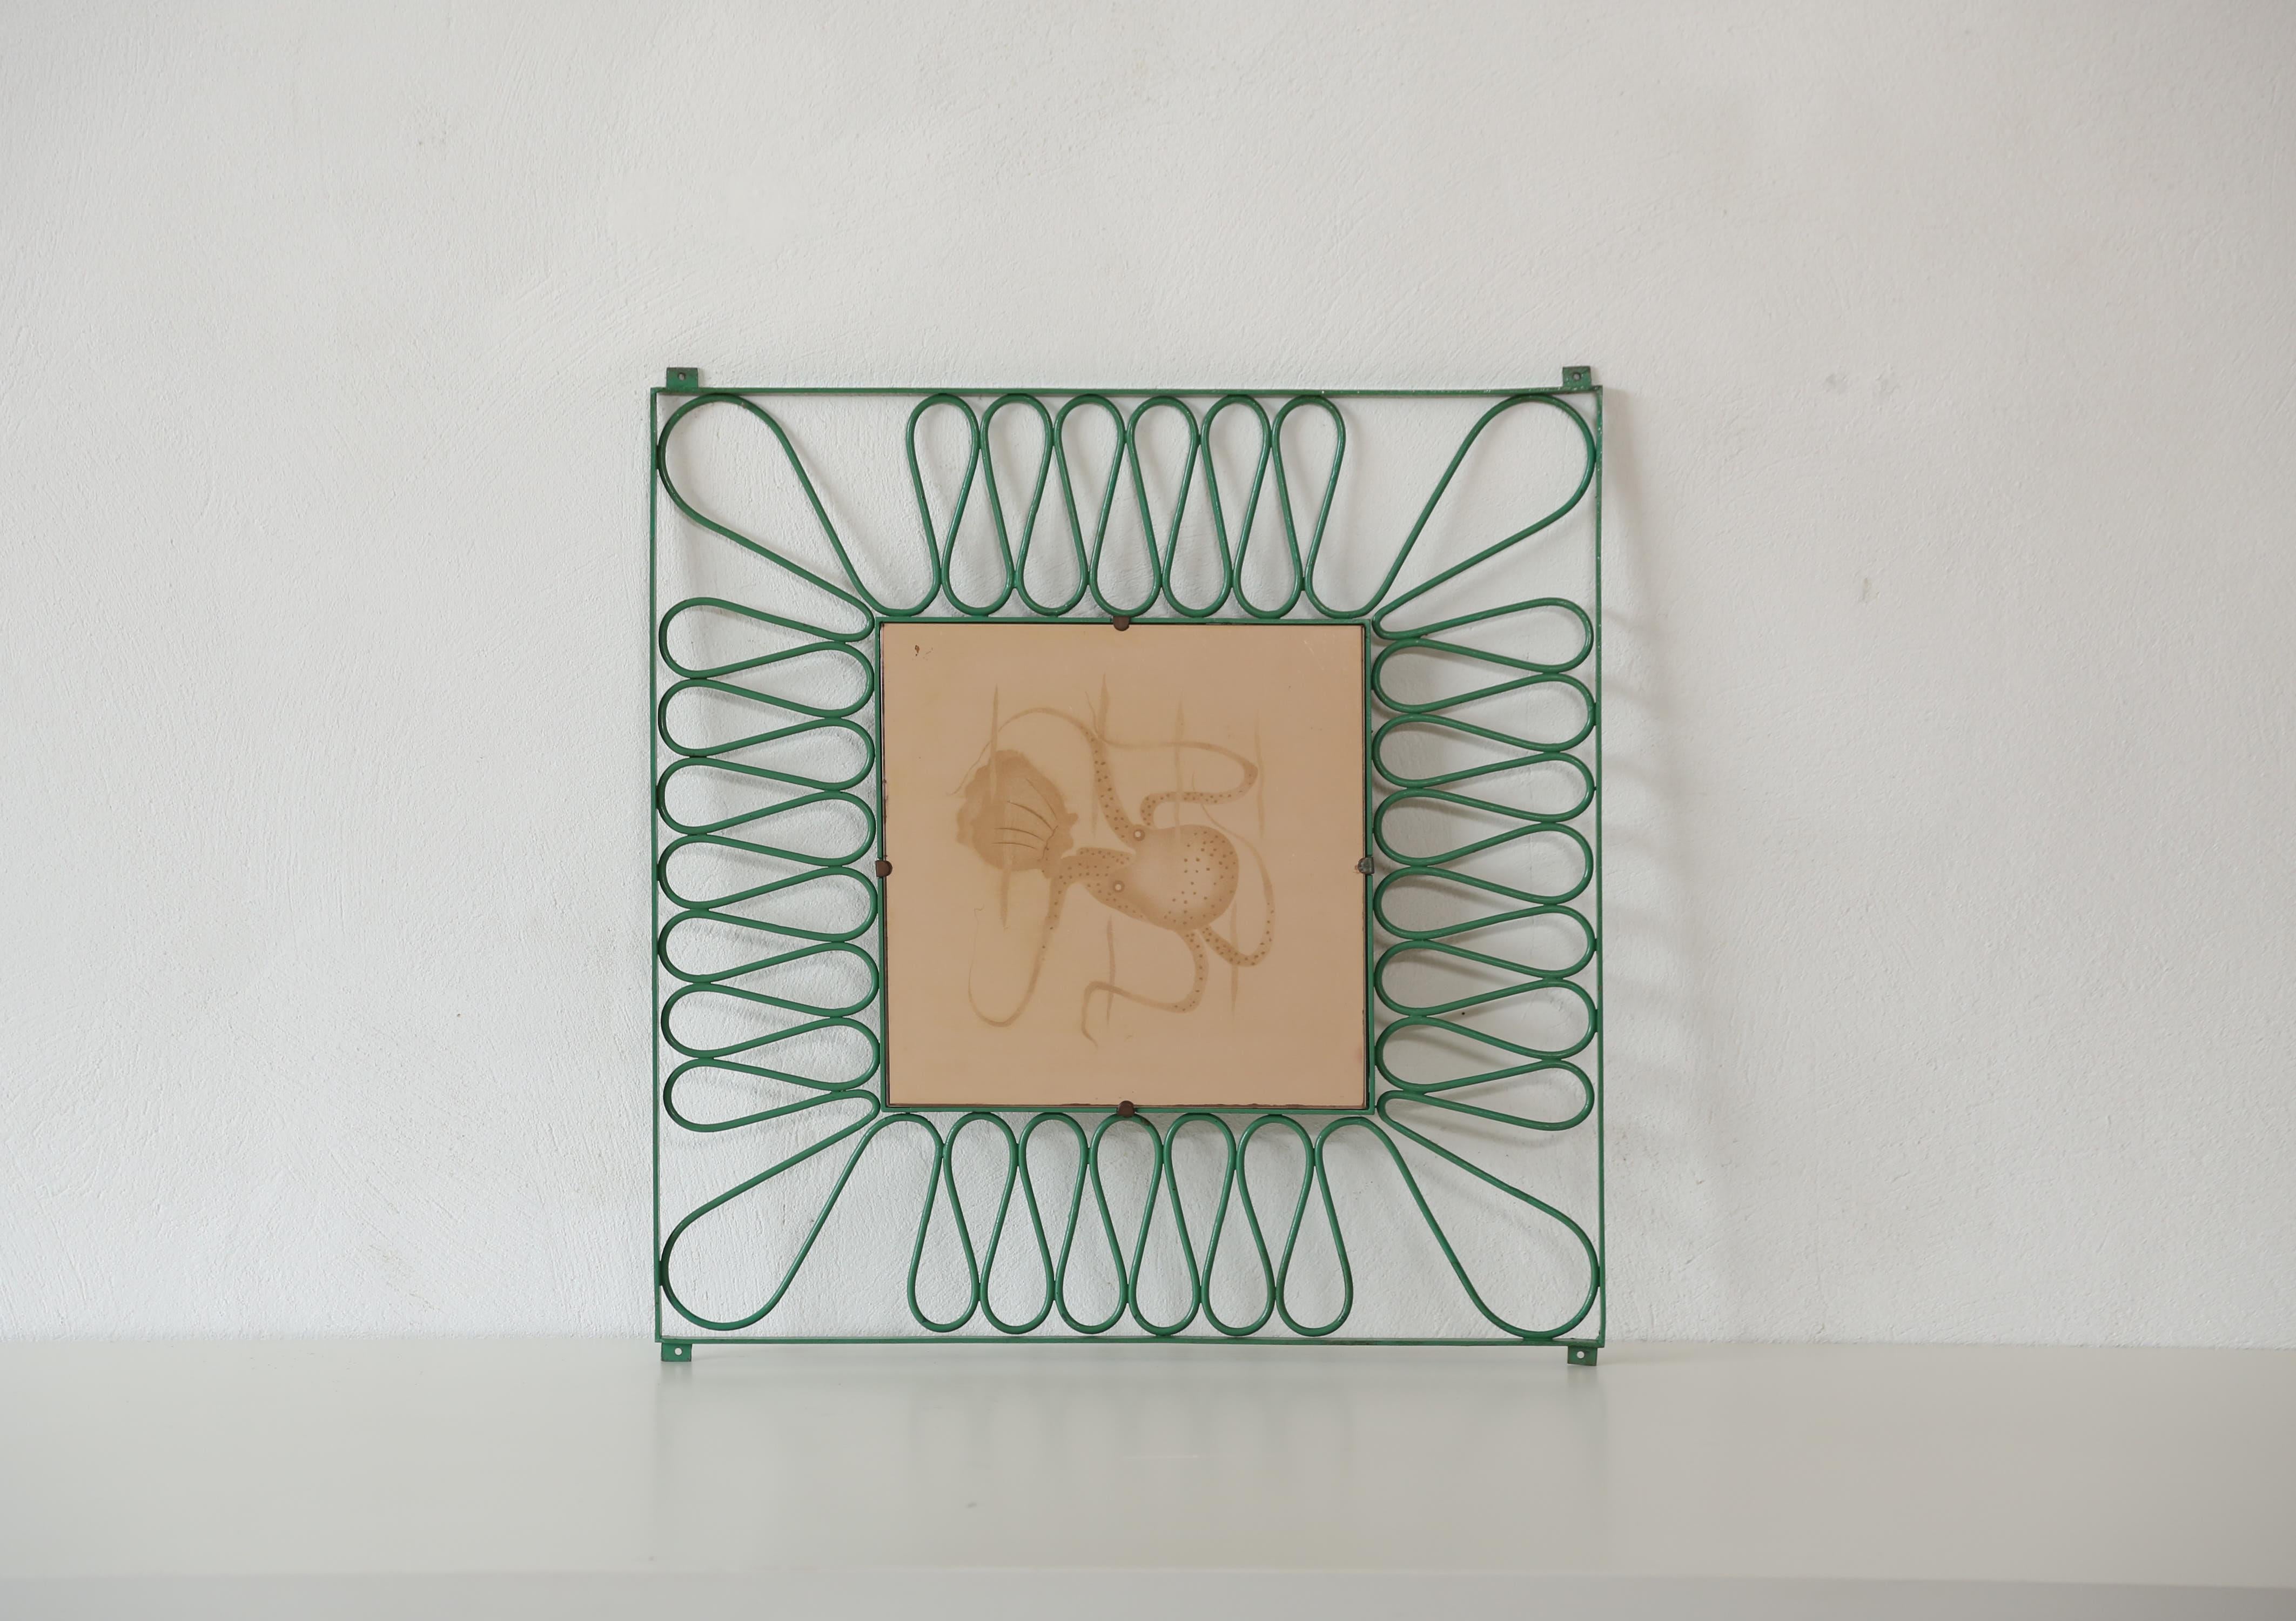 Unique Osvaldo Borsani Mirror / Frame, Arredamenti Borsani, Varedo, Italy, 1950s.   From a private Milanese villa.   Green painted metal and hand etched rose glass showing an octopus and fish.    Several pieces with different designs available.   